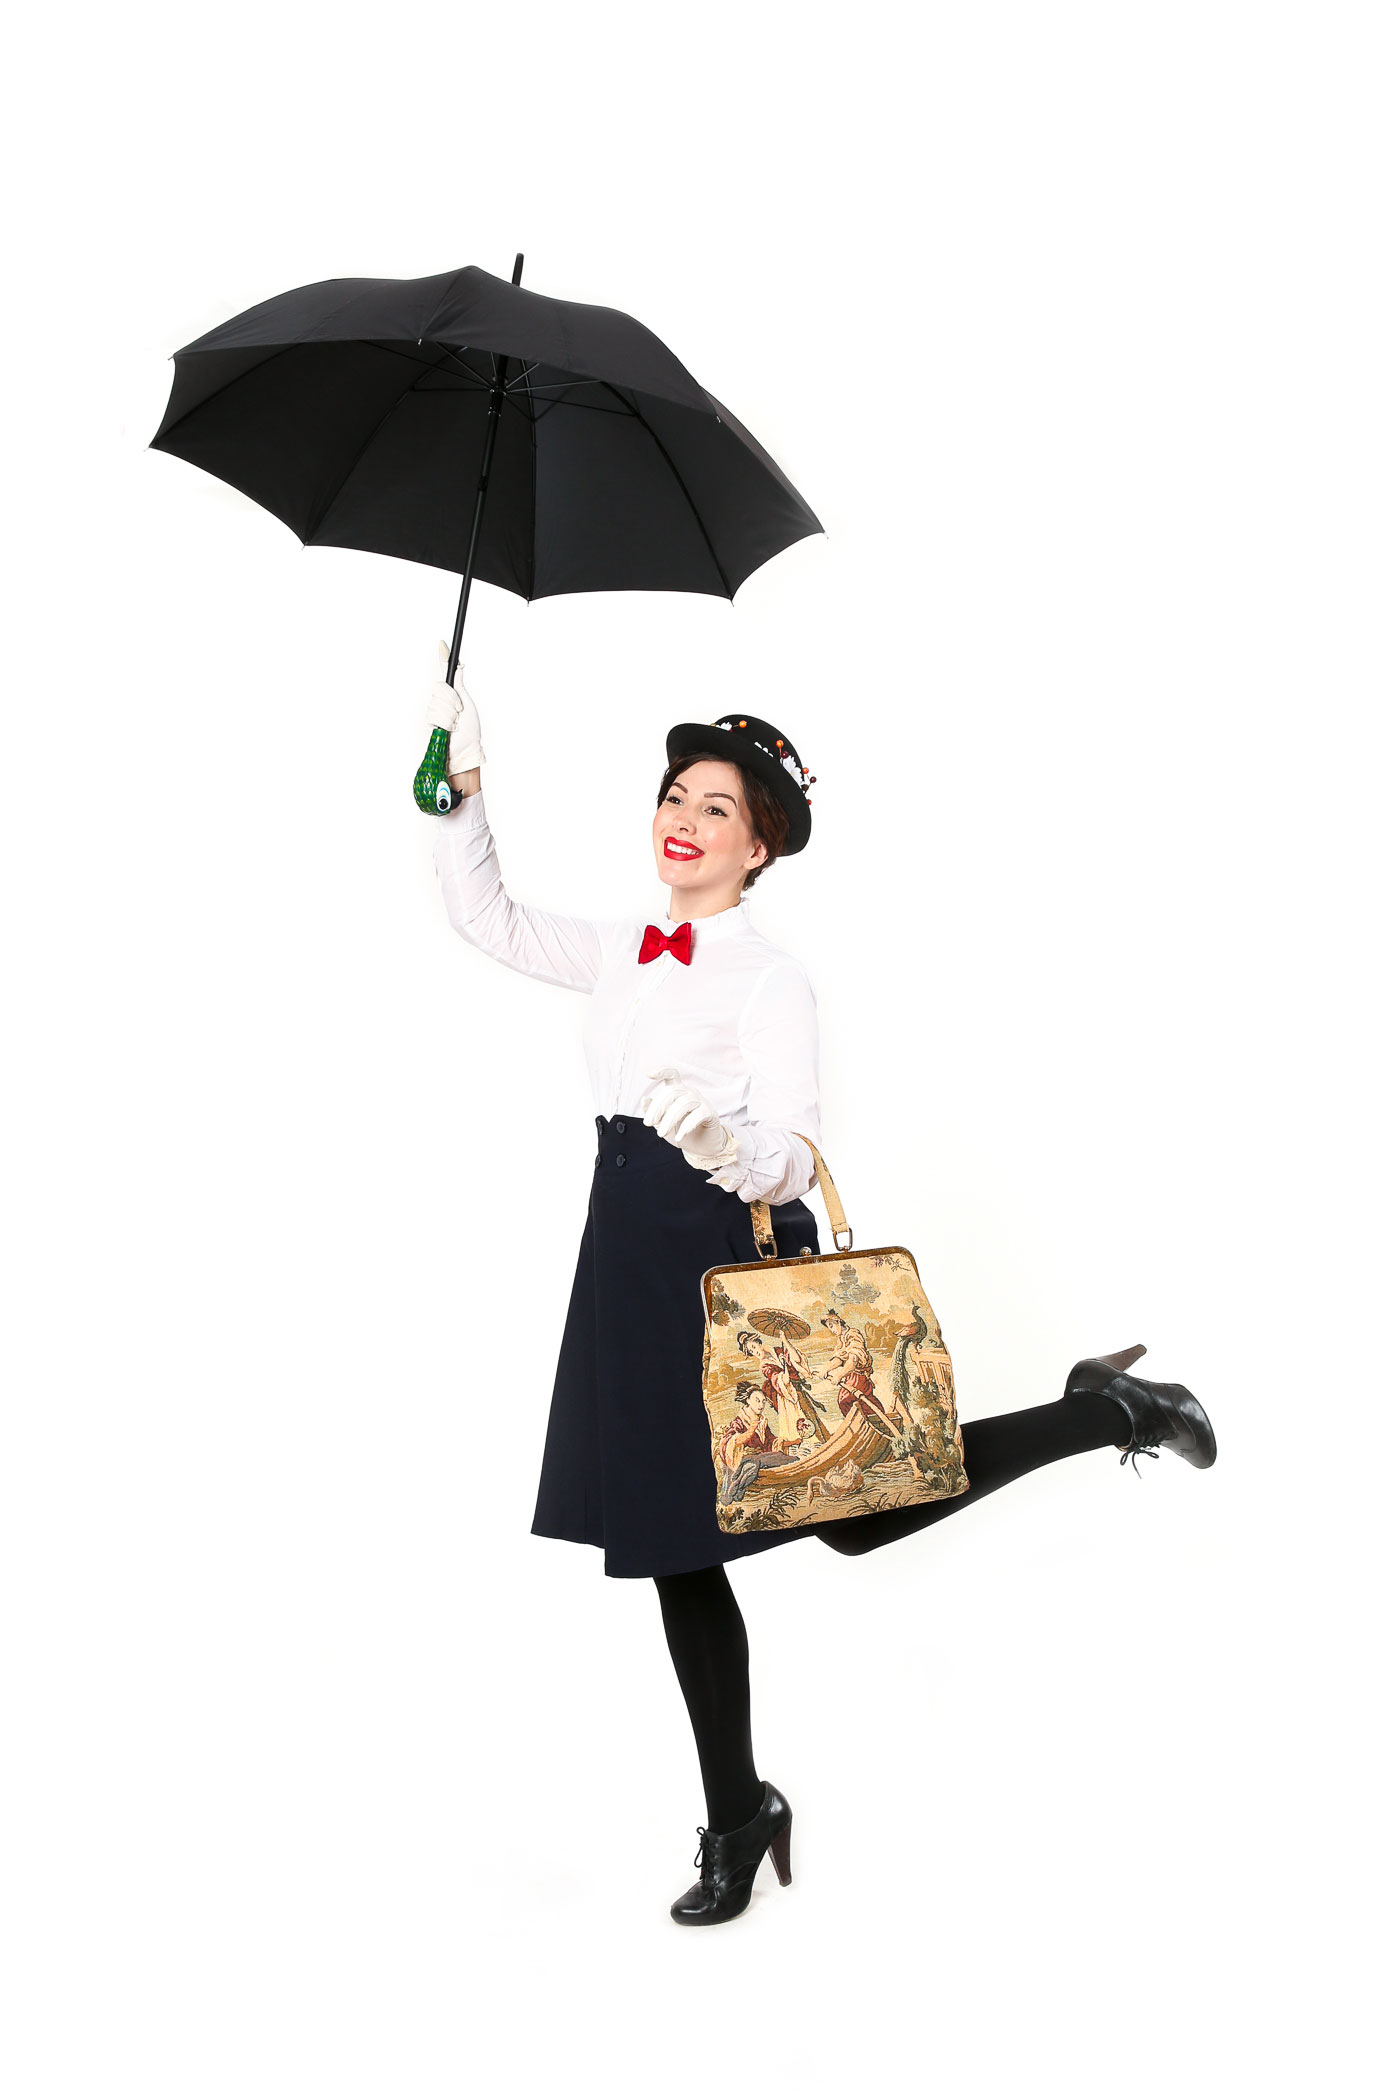 Halloween Couples Costume Idea: Mary Poppins and Bert.